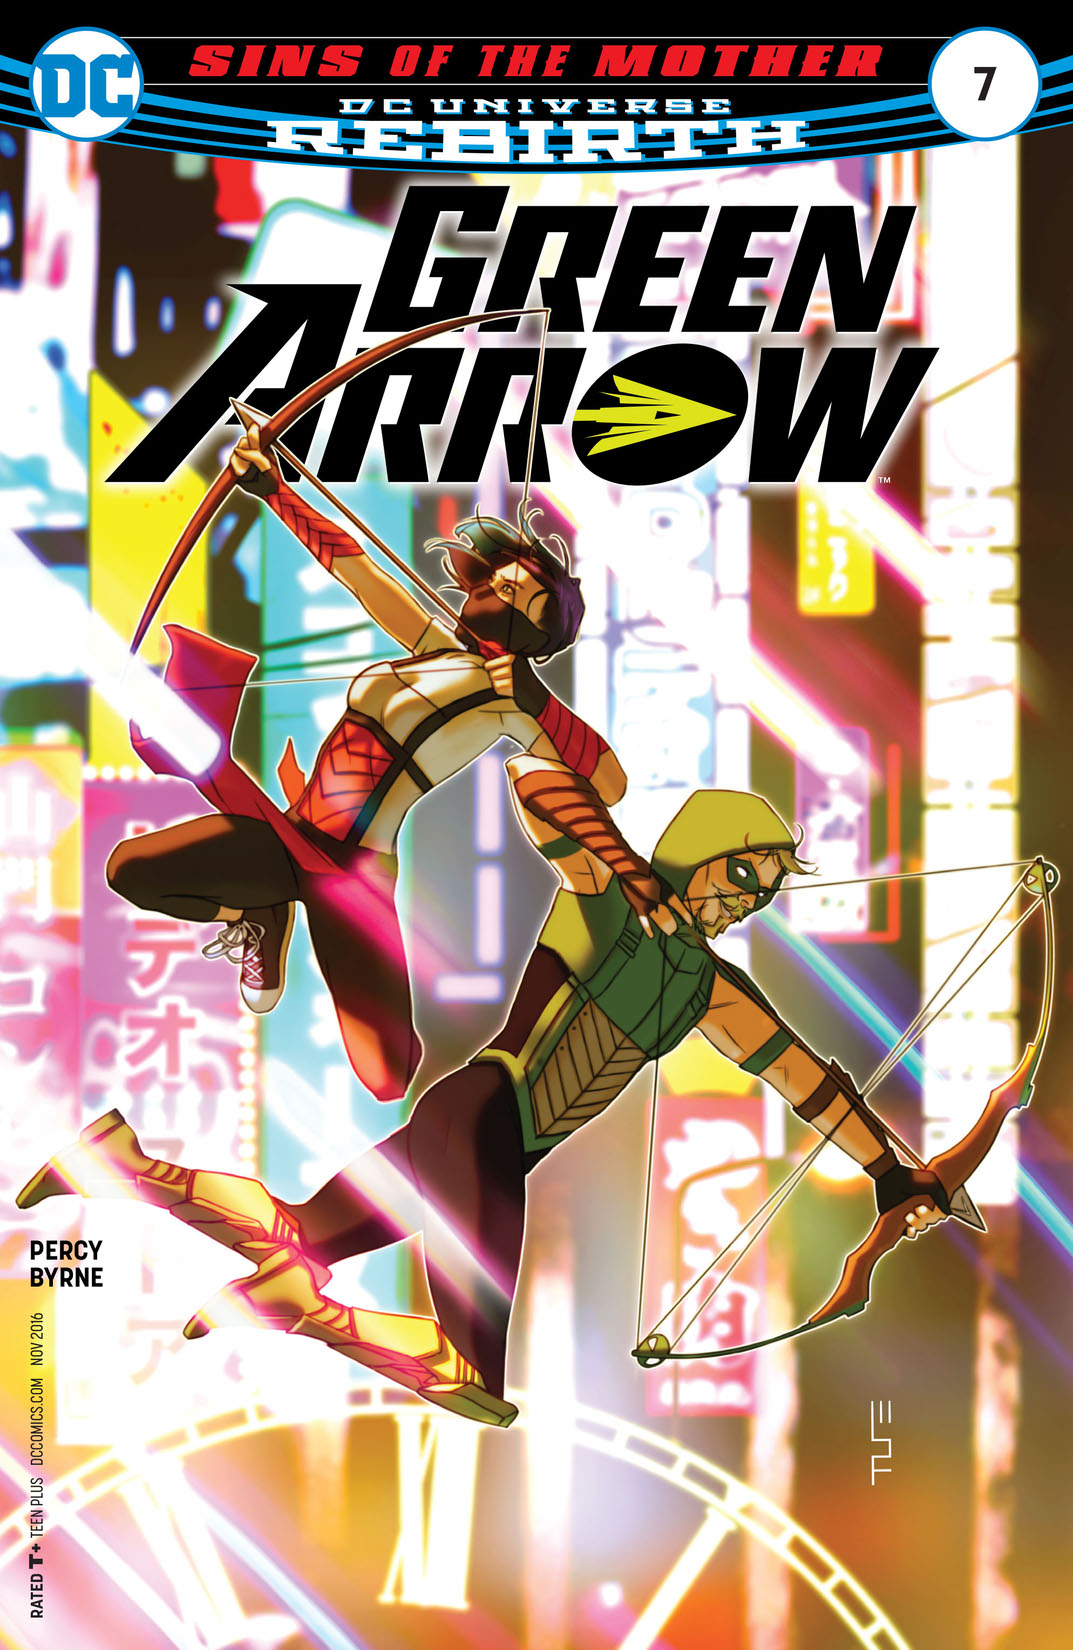 Green Arrow (2016-) #7 preview images